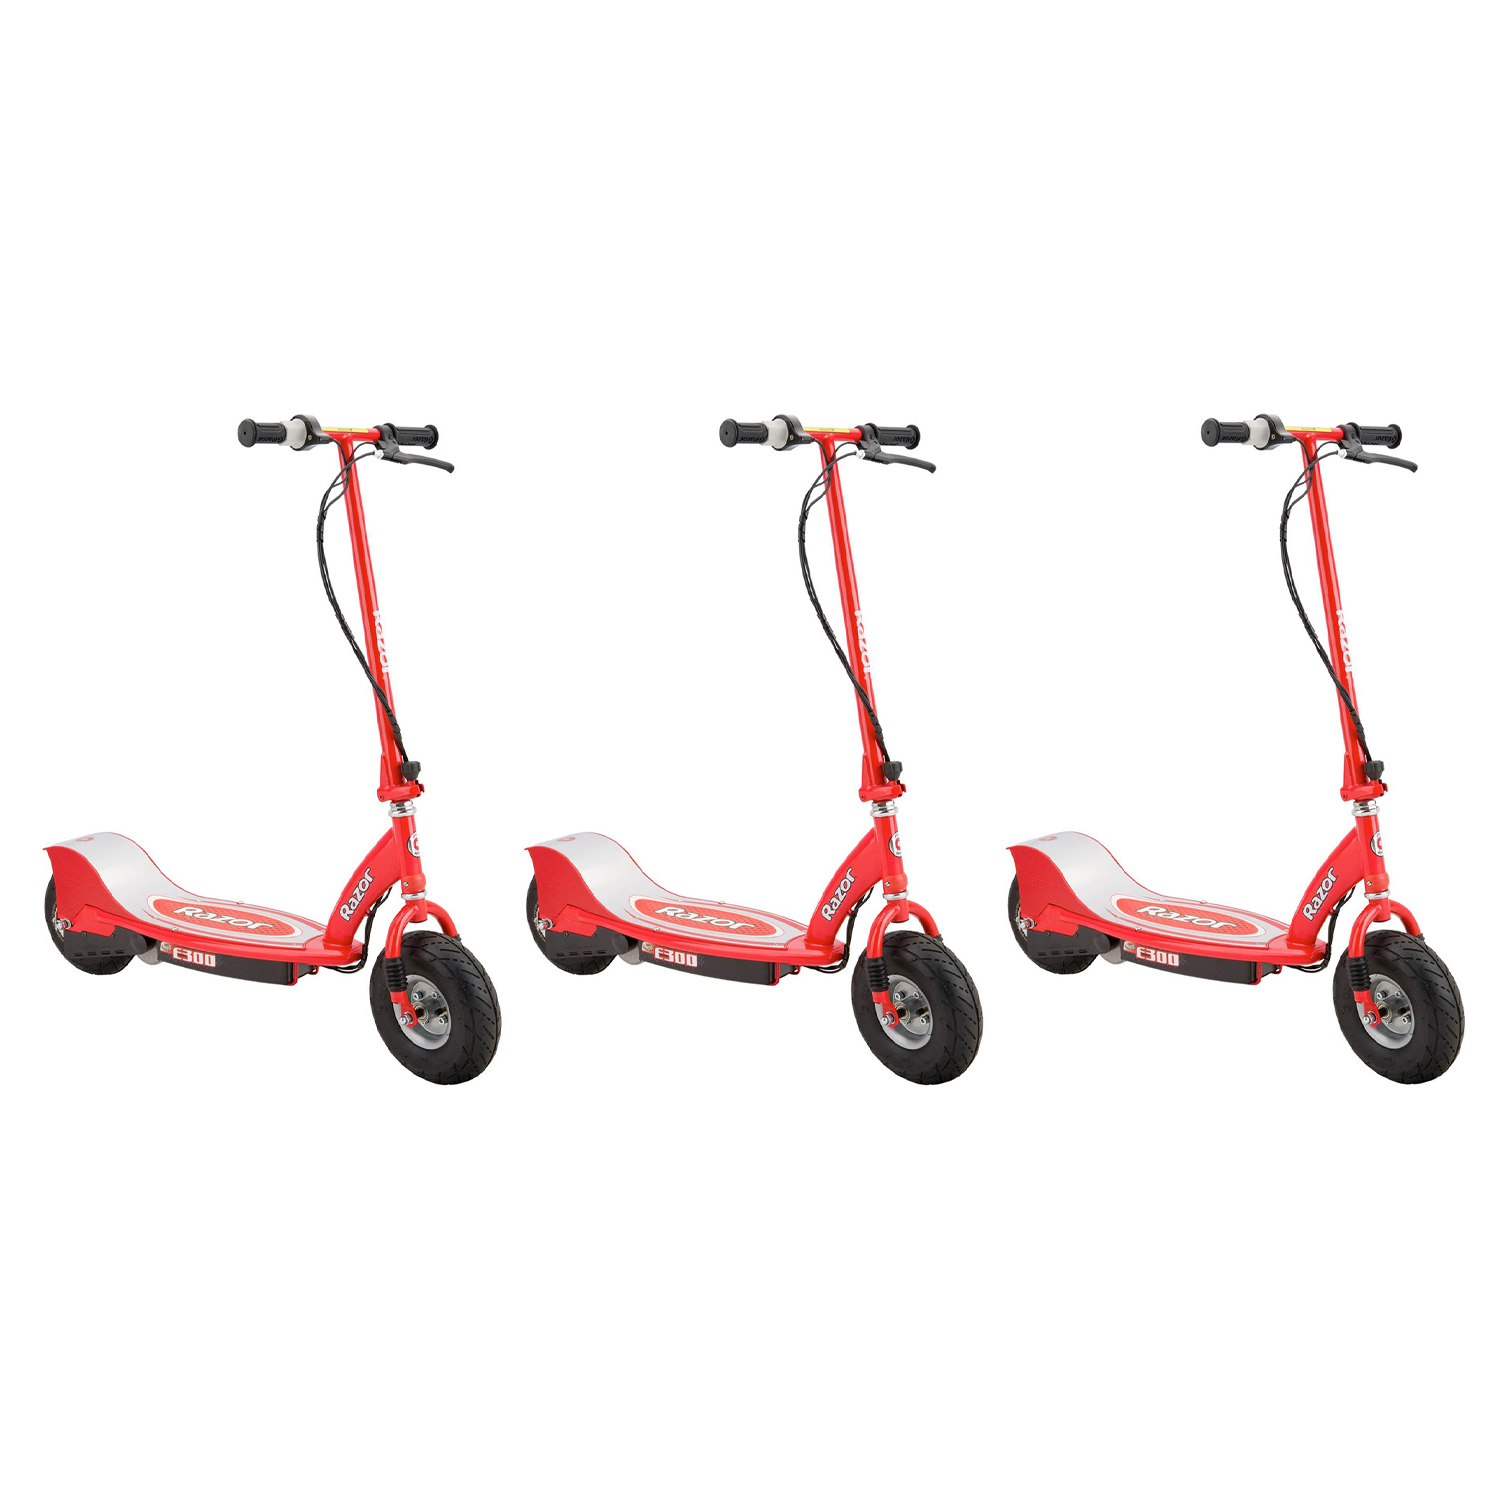 Razor E300 Adult Ride On 24v High Torque Electric Powered Scooter Red